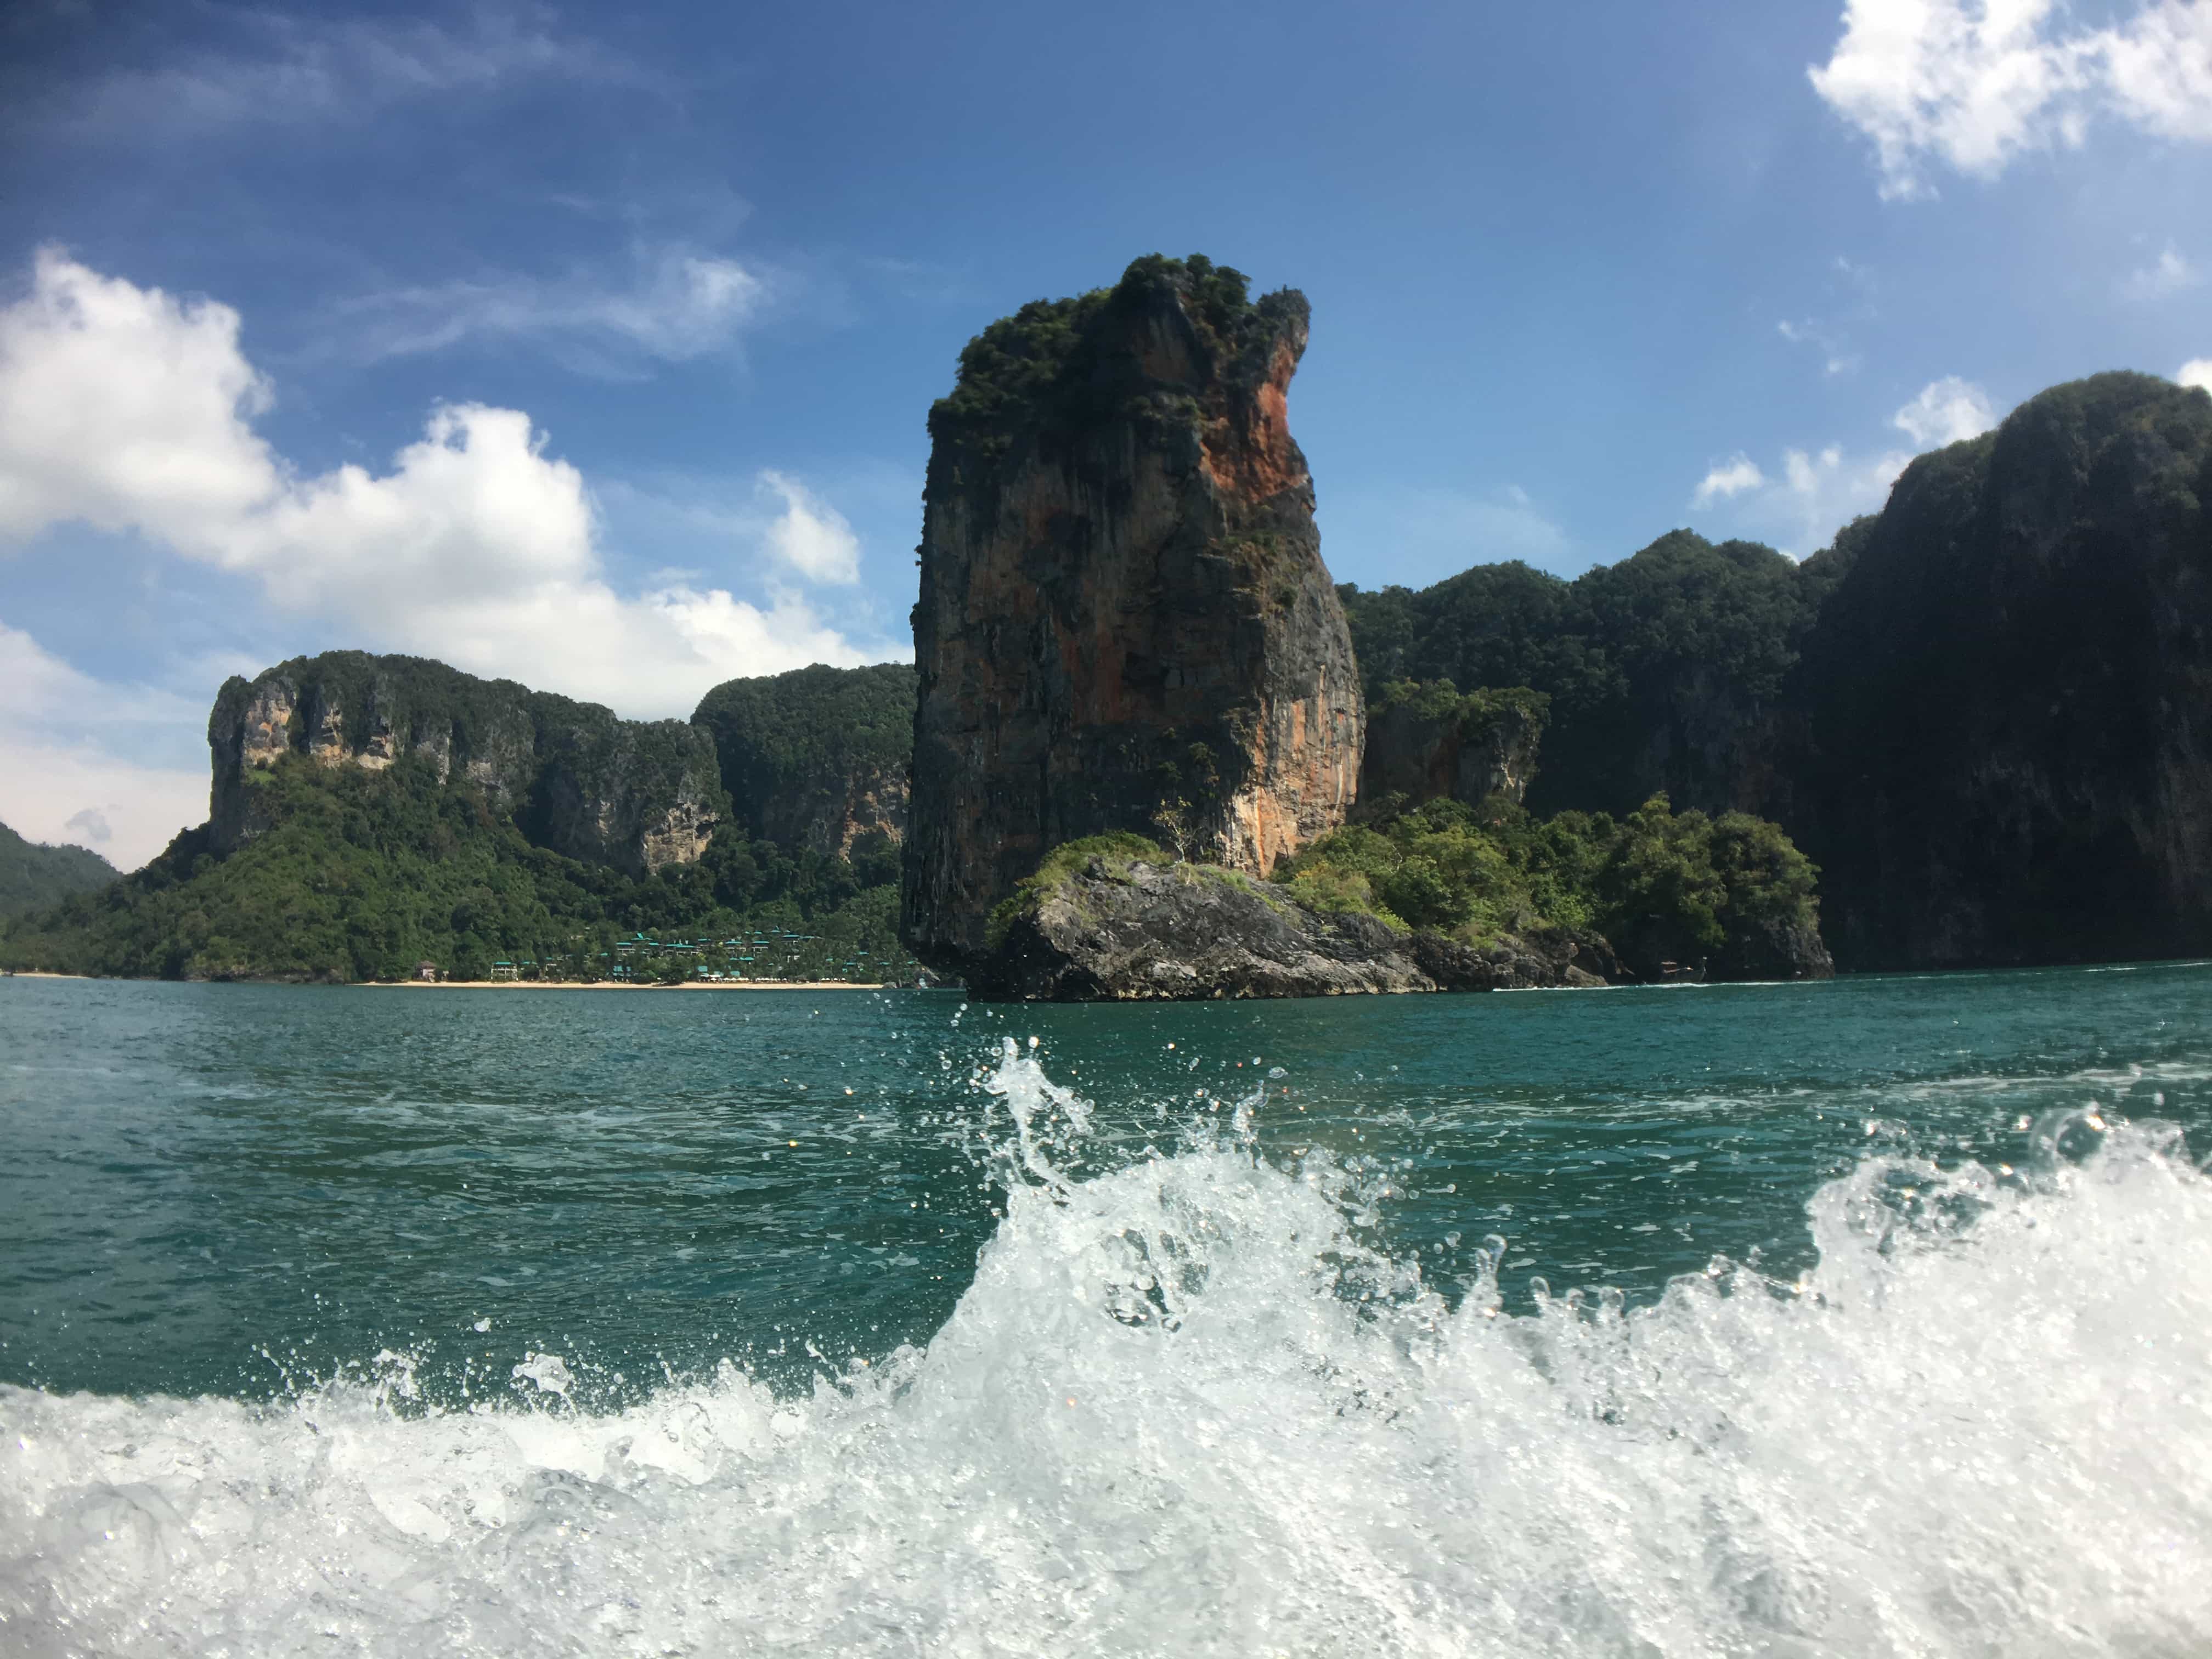 Riding the boat to Thailand beaches